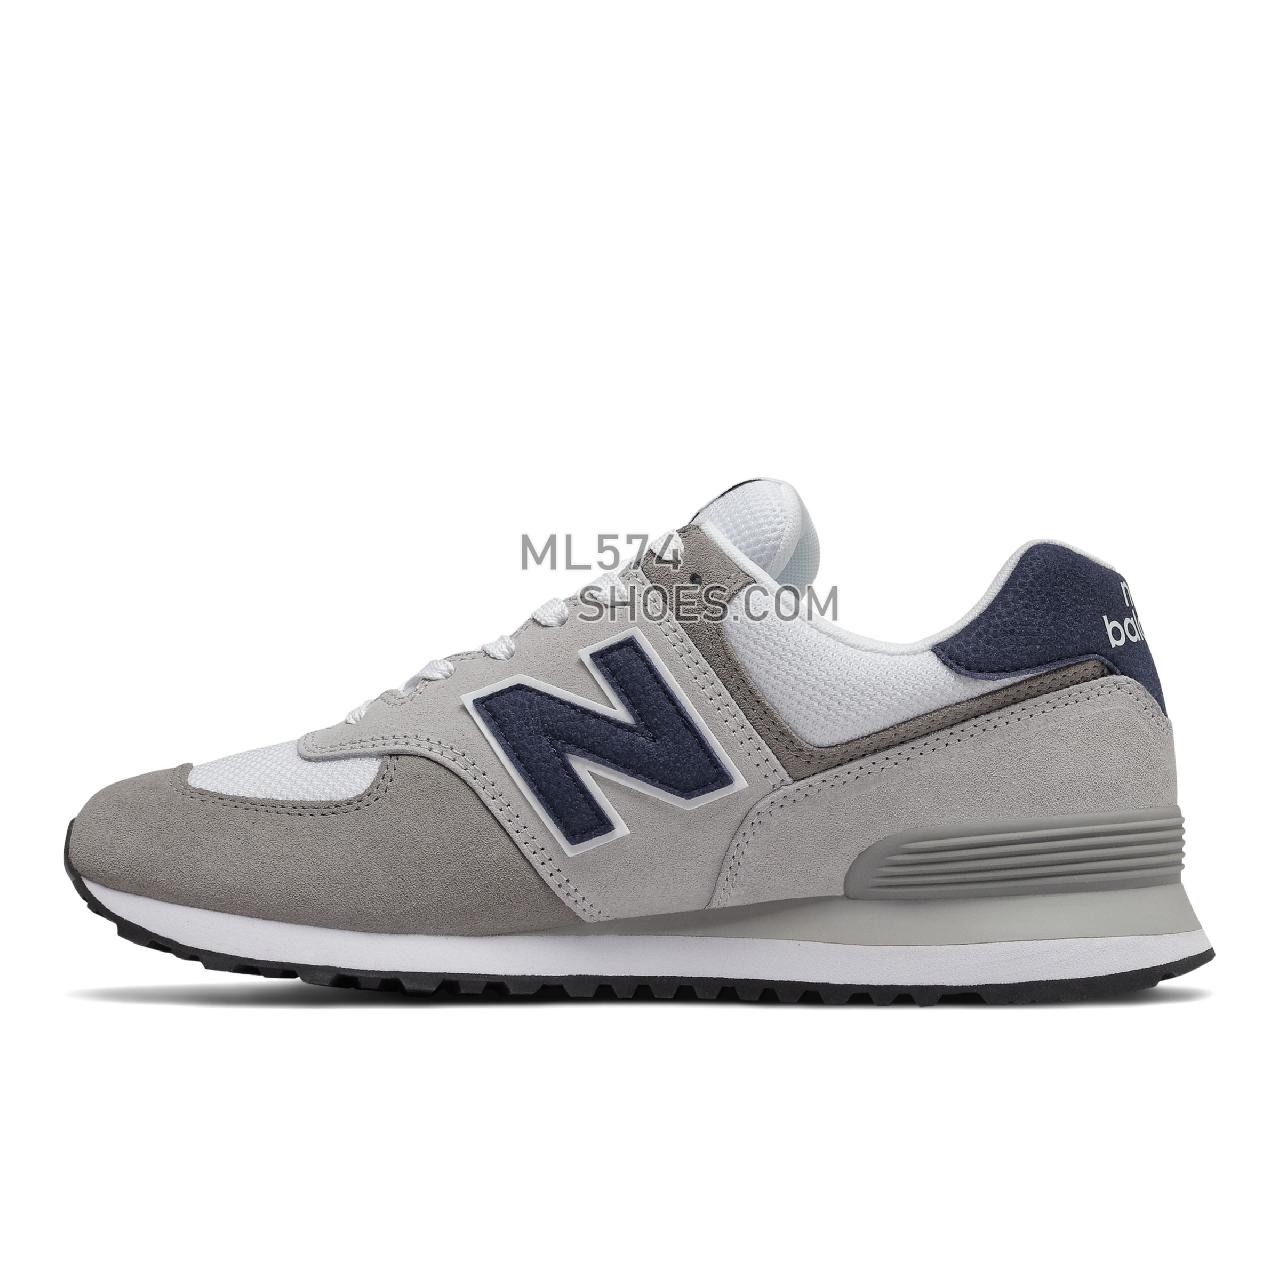 New Balance 574v2 - Men's Classic Sneakers - Rain Cloud with White - ML574EAG